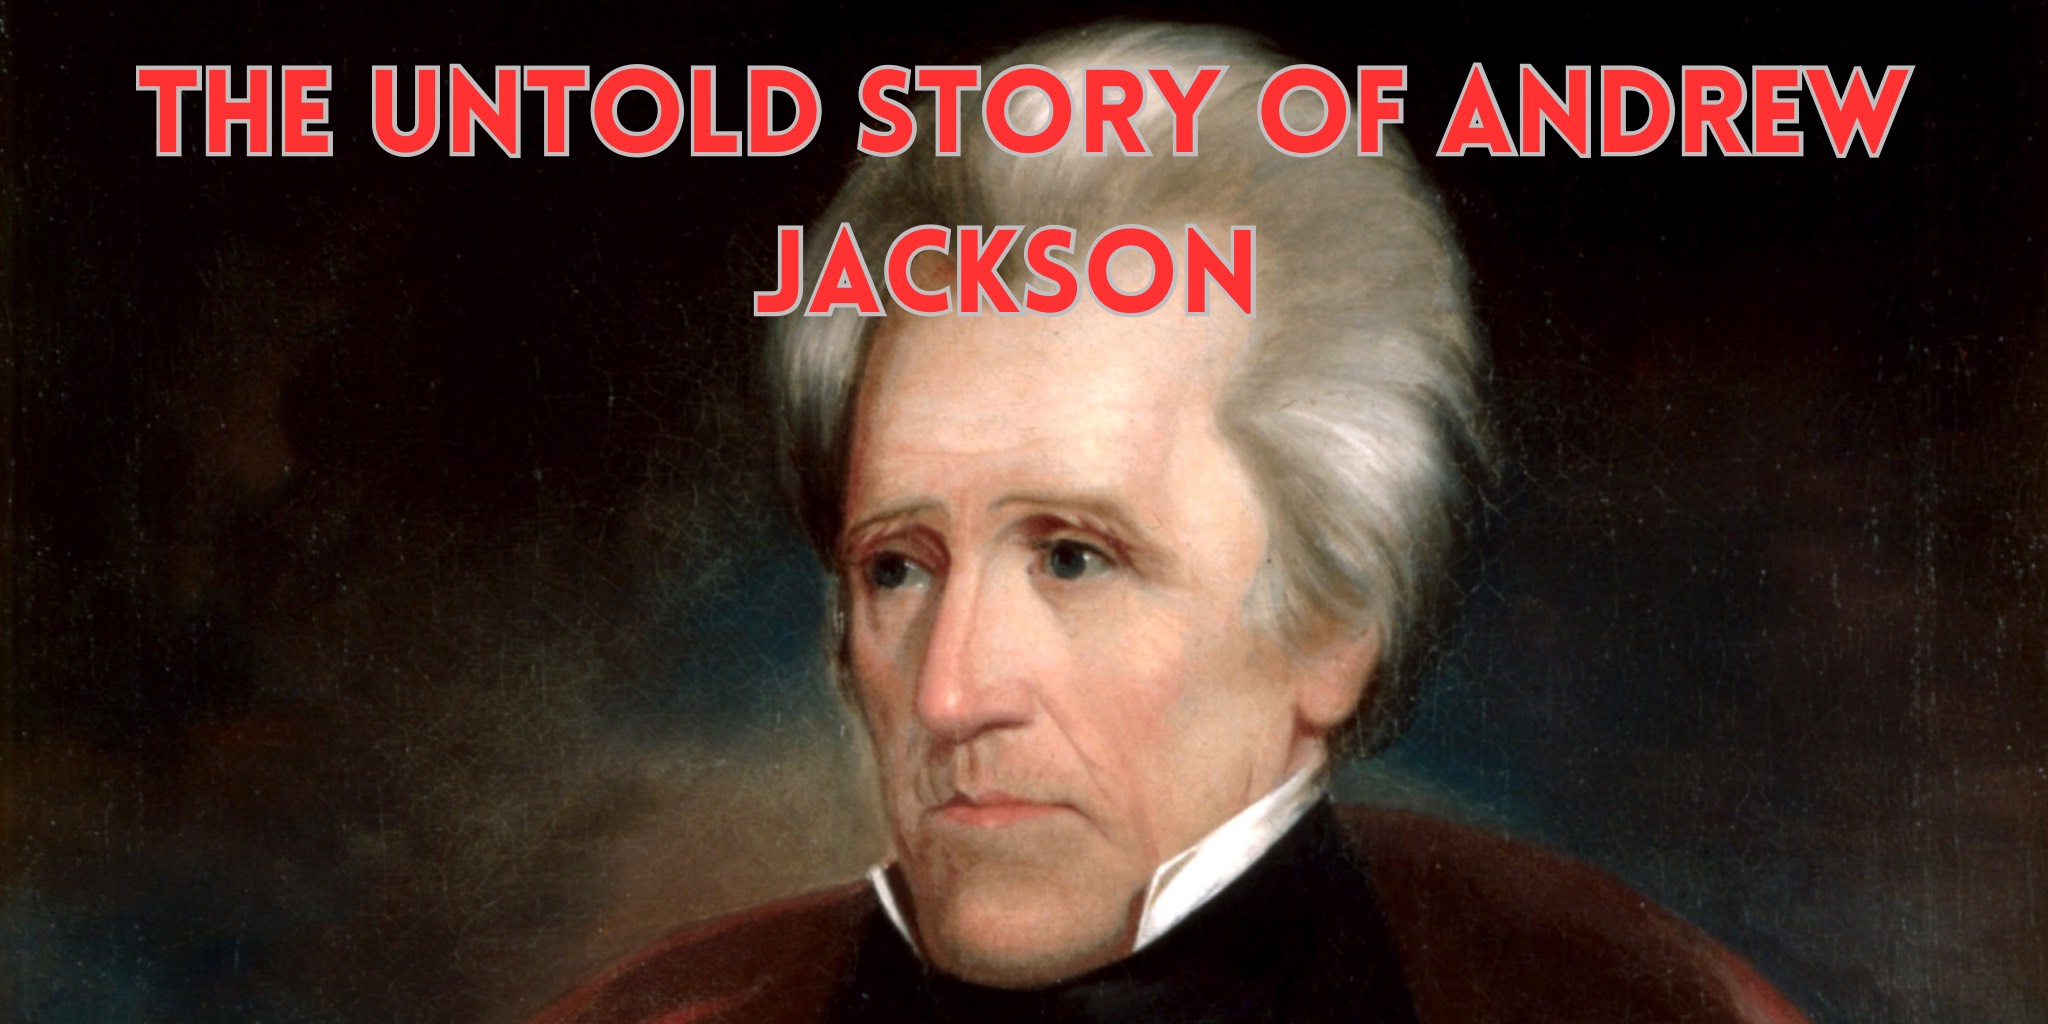 The Untold Story of Andrew Jackson